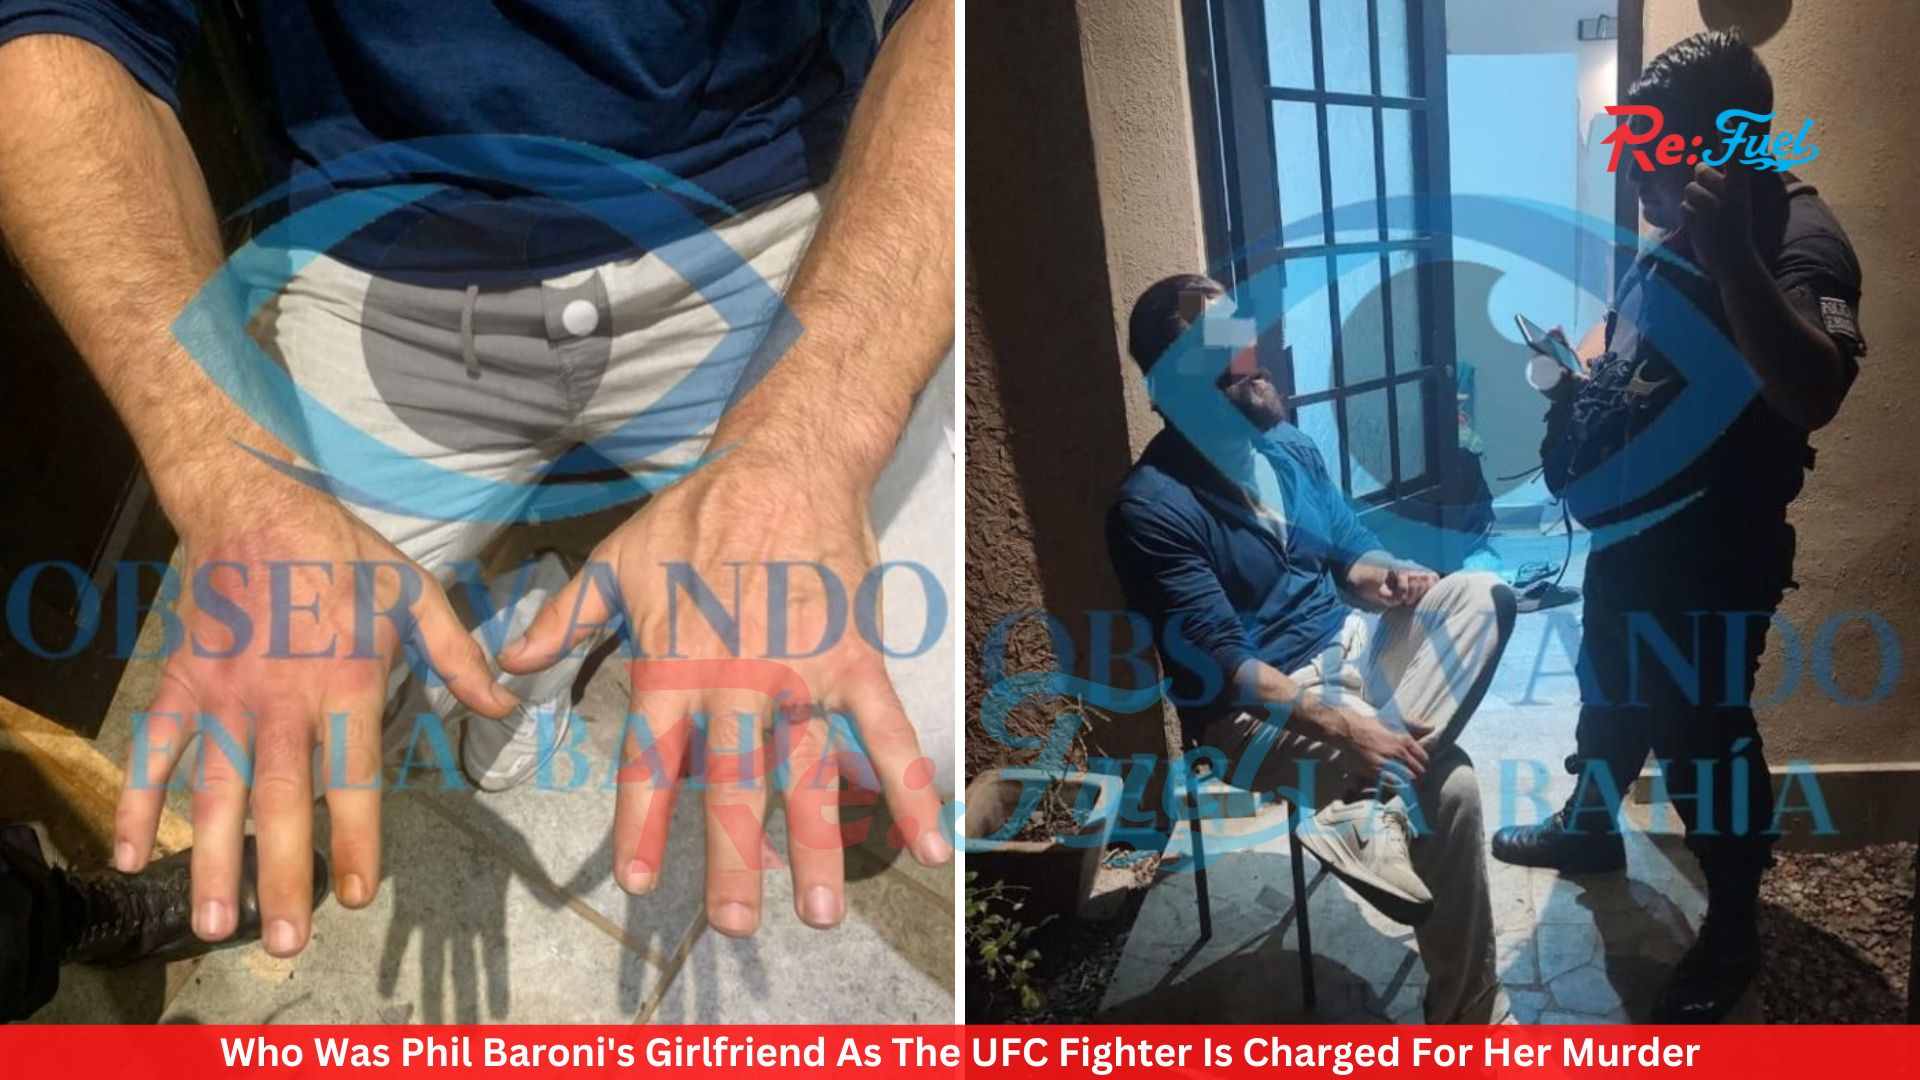 Who Was Phil Baroni's Girlfriend As The UFC Fighter Is Charged For Her Murder